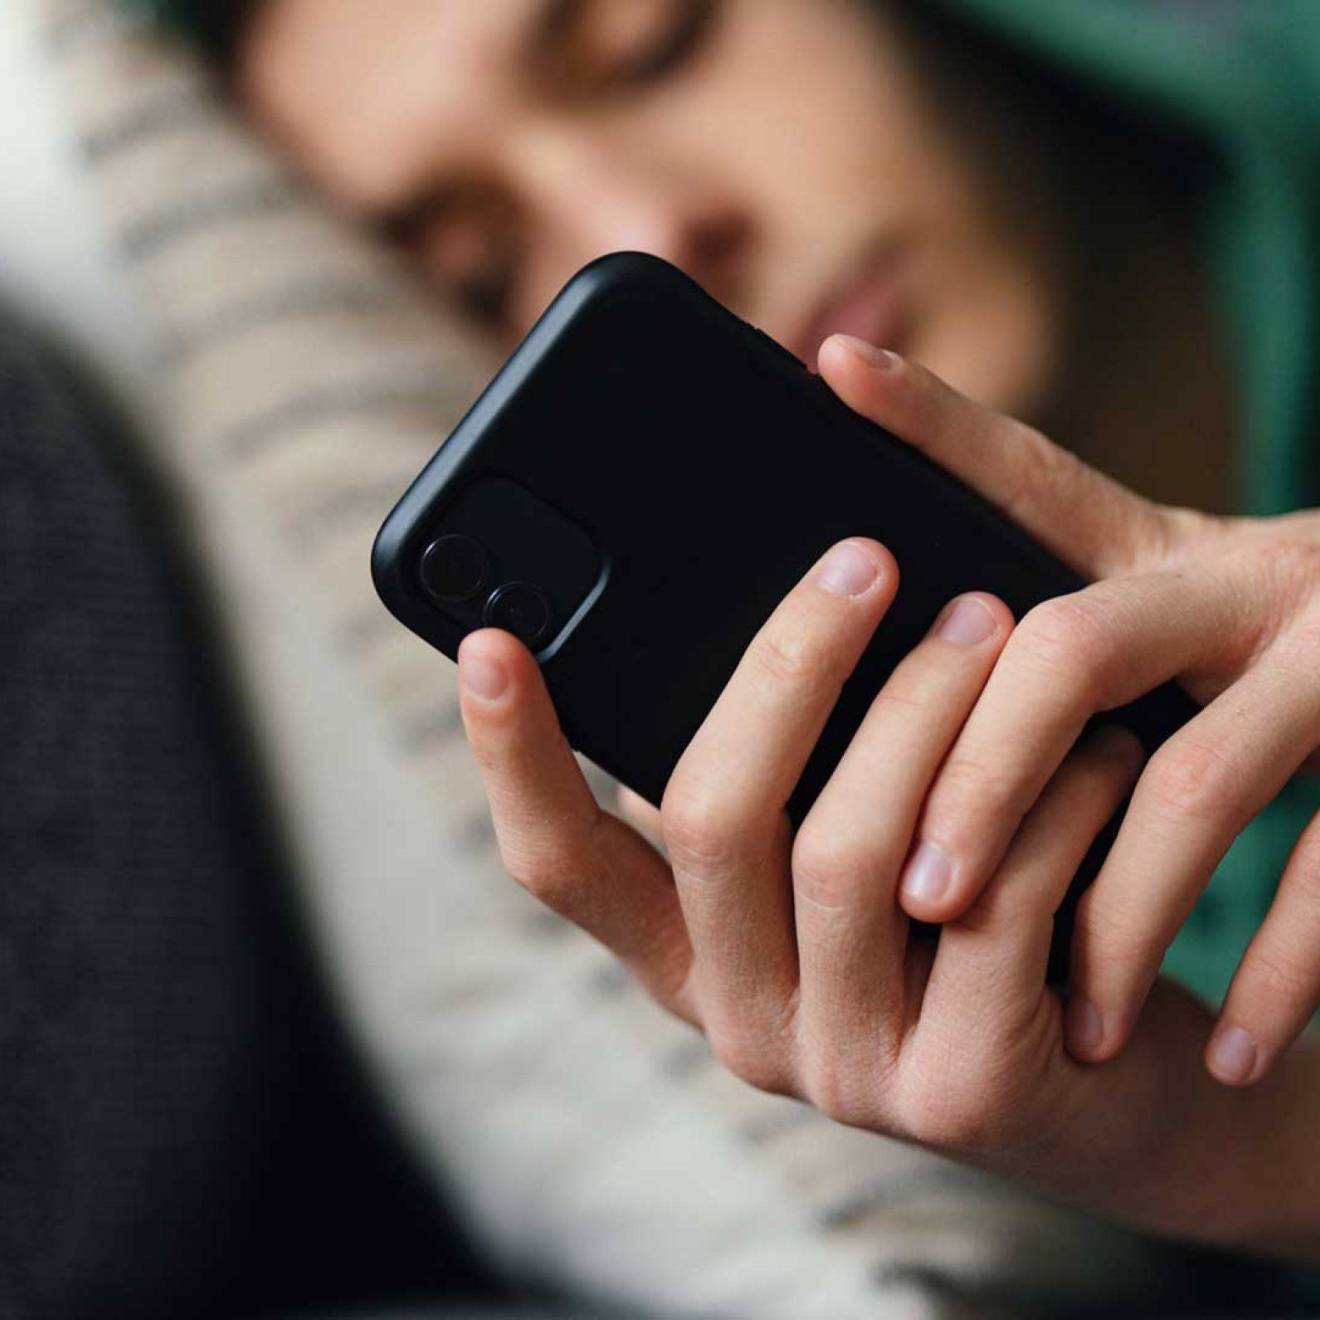 A teen, slightly out of focus, lying on the couch, looking at phone